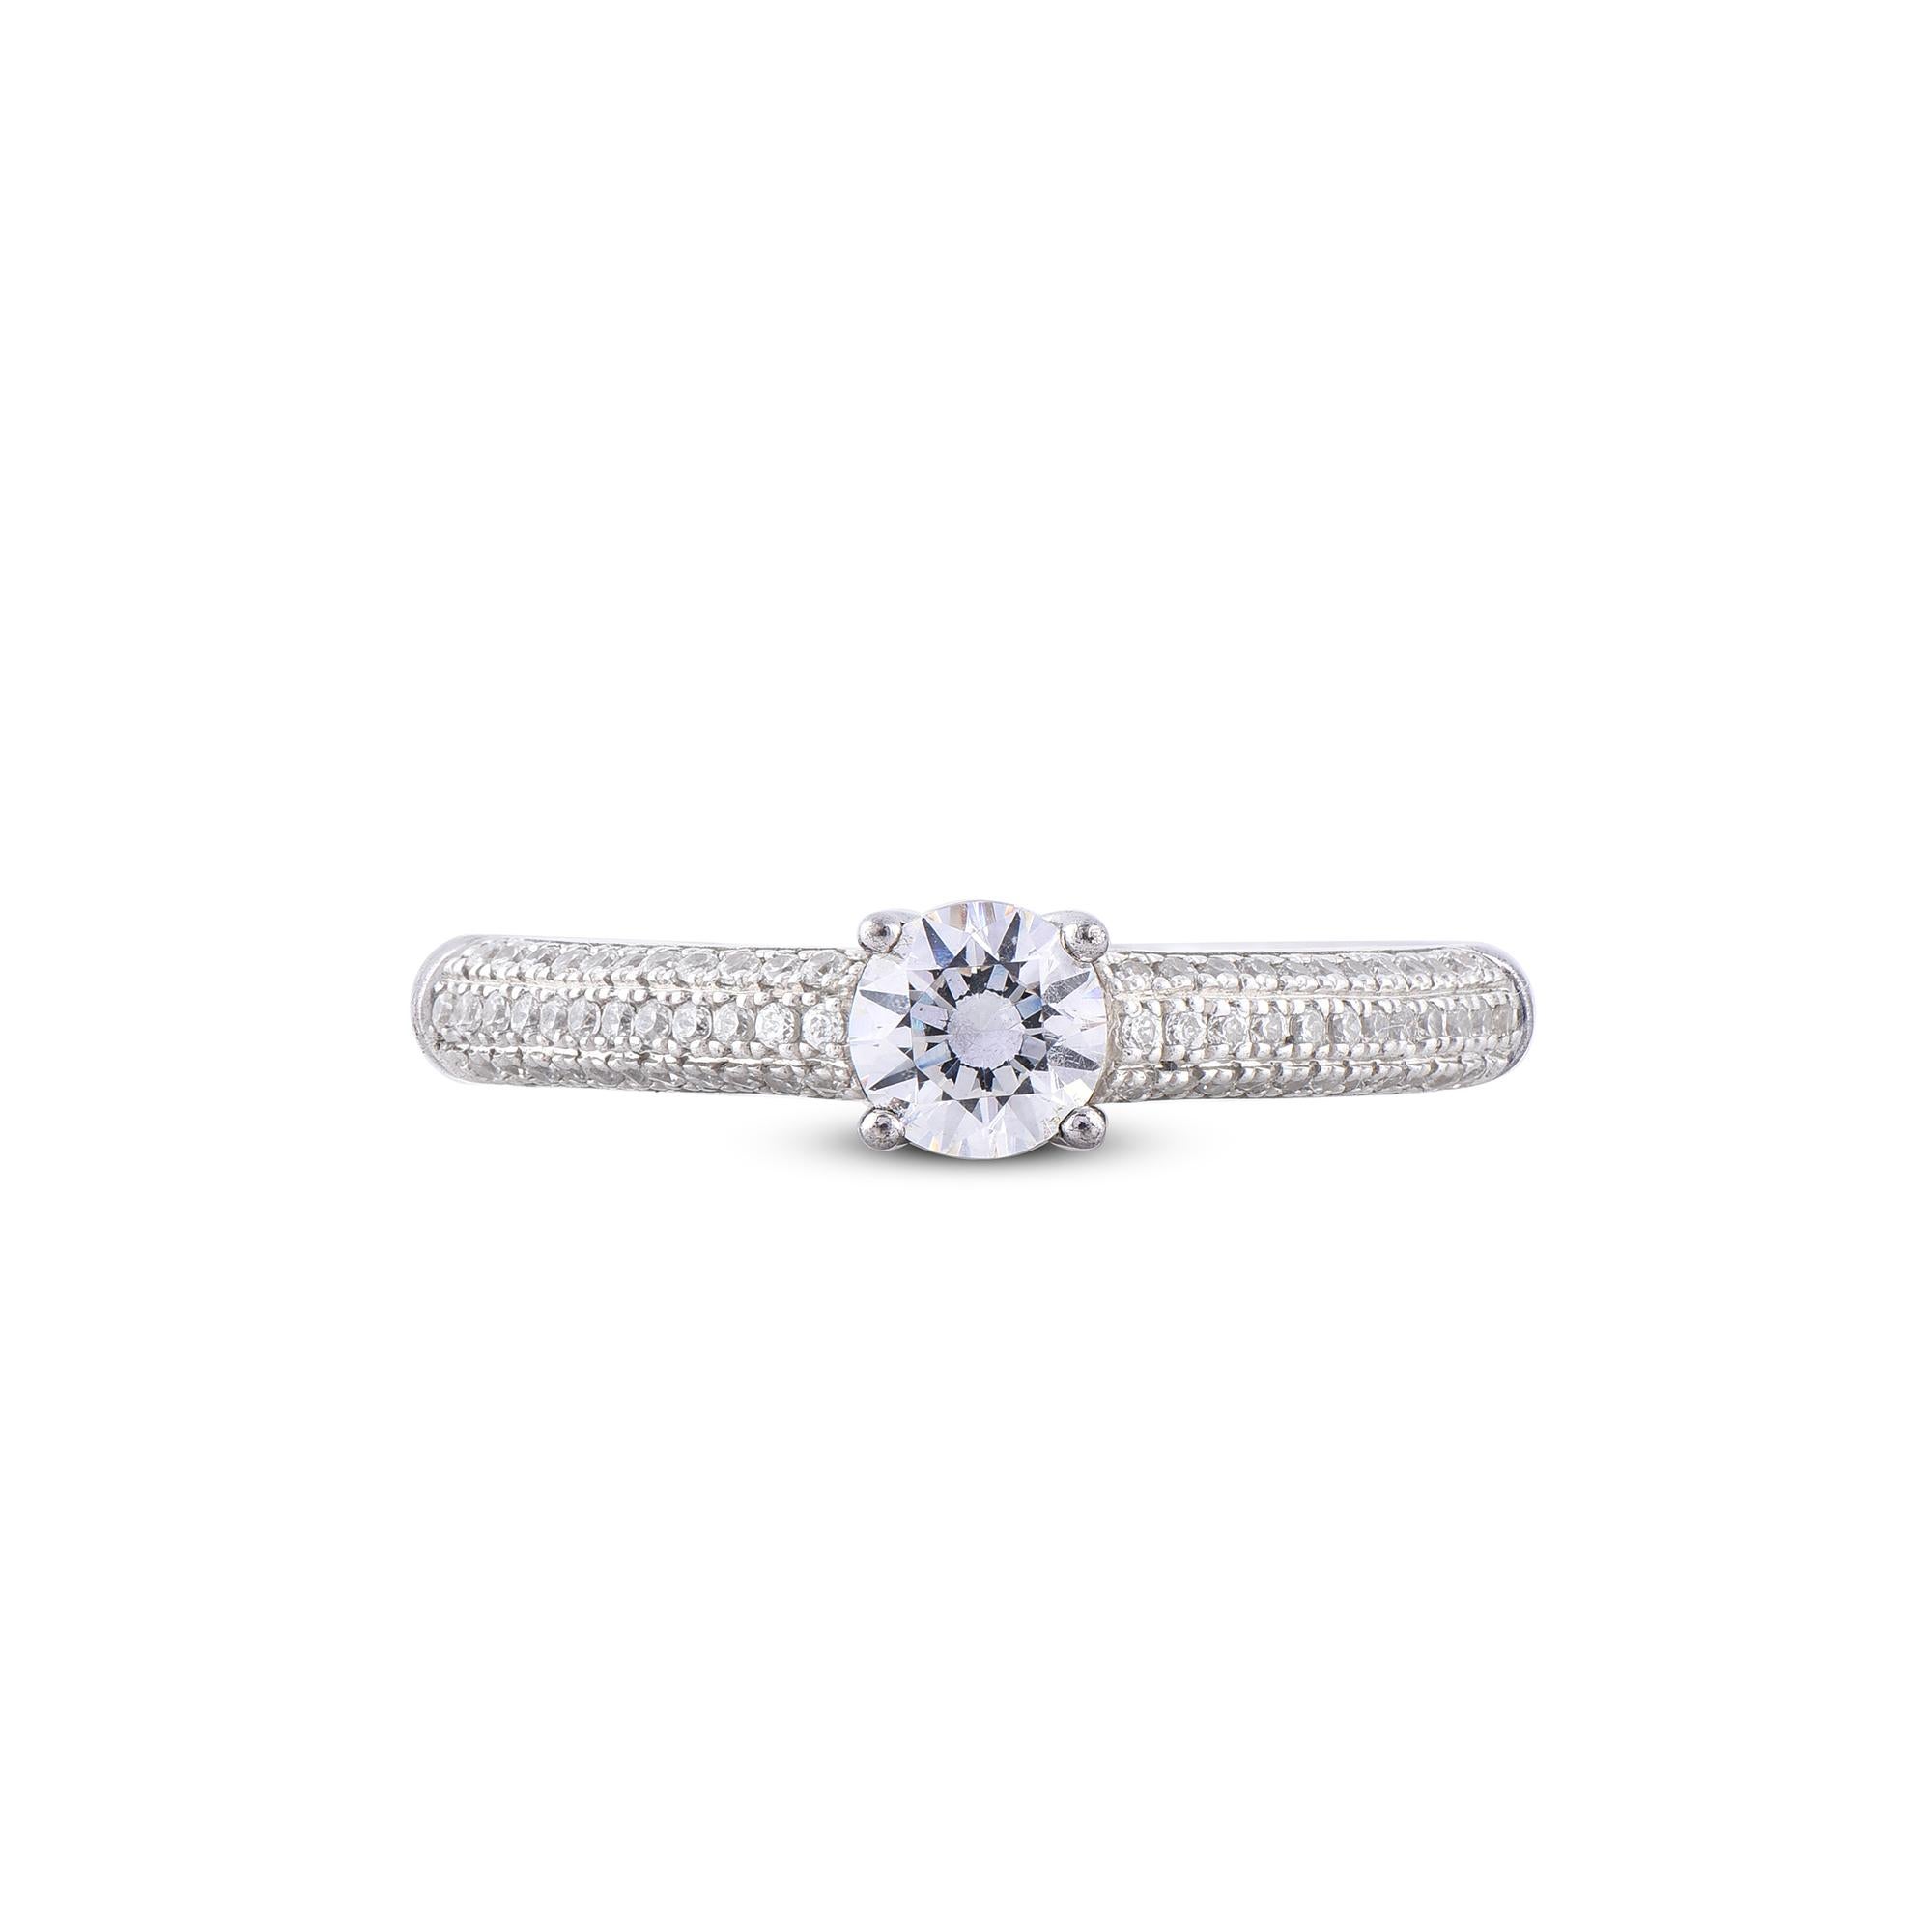 A graceful addition to her wardrobe, this design crafted in 14 Karat white gold and it's features 69 round brilliant cut and single cut diamond set in prong setting. Total diamond weight is 0.66 carat. The diamond are natural, not treated and